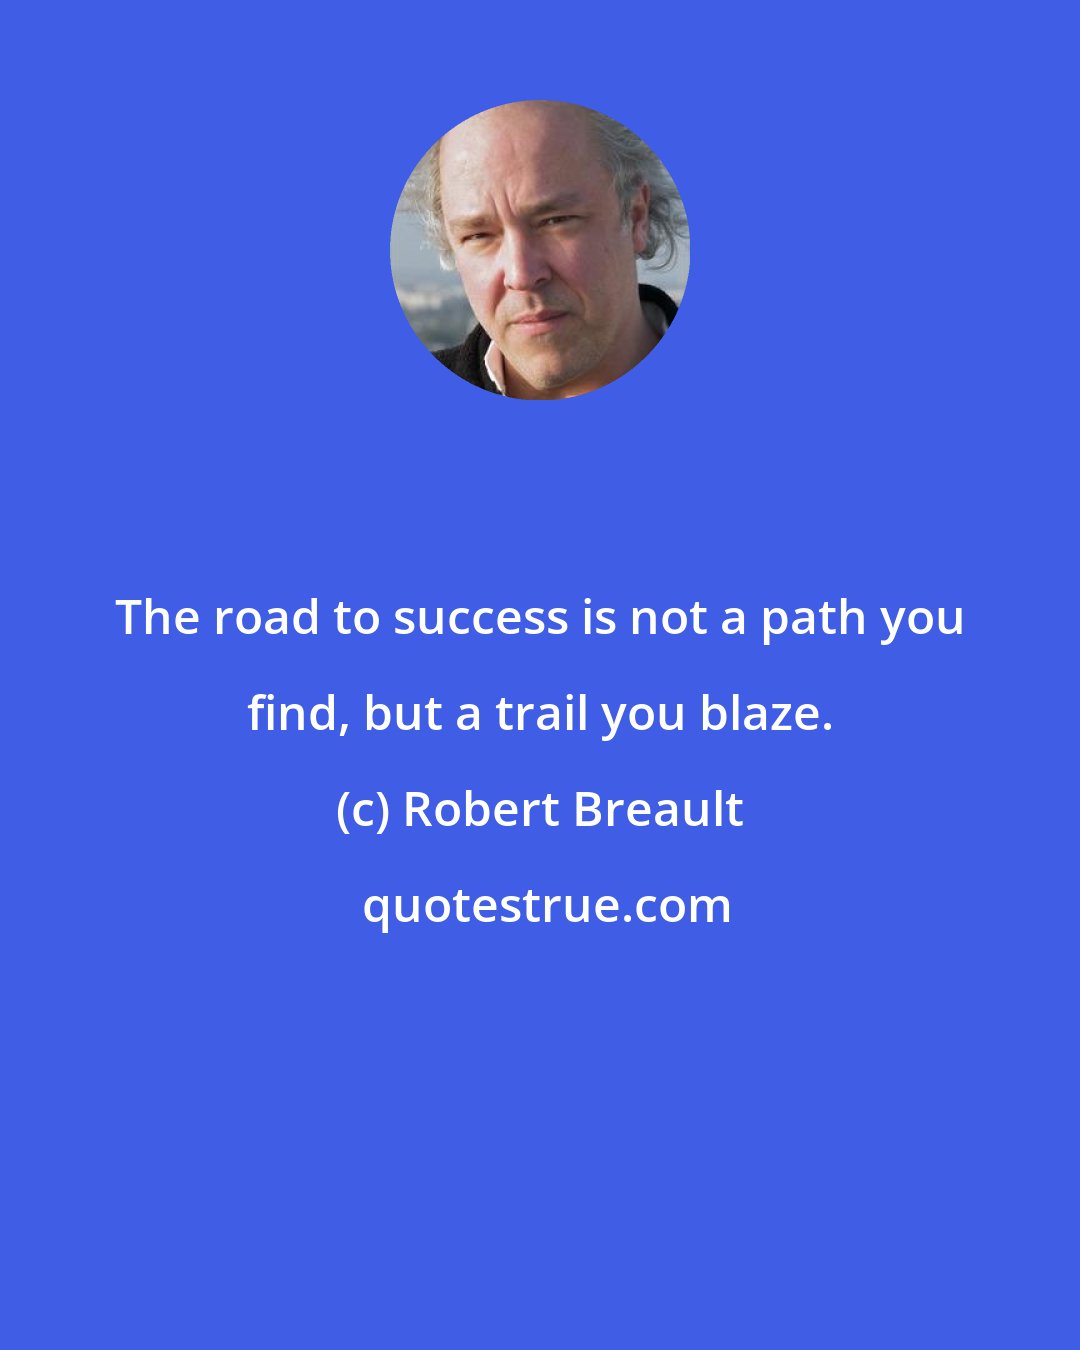 Robert Breault: The road to success is not a path you find, but a trail you blaze.